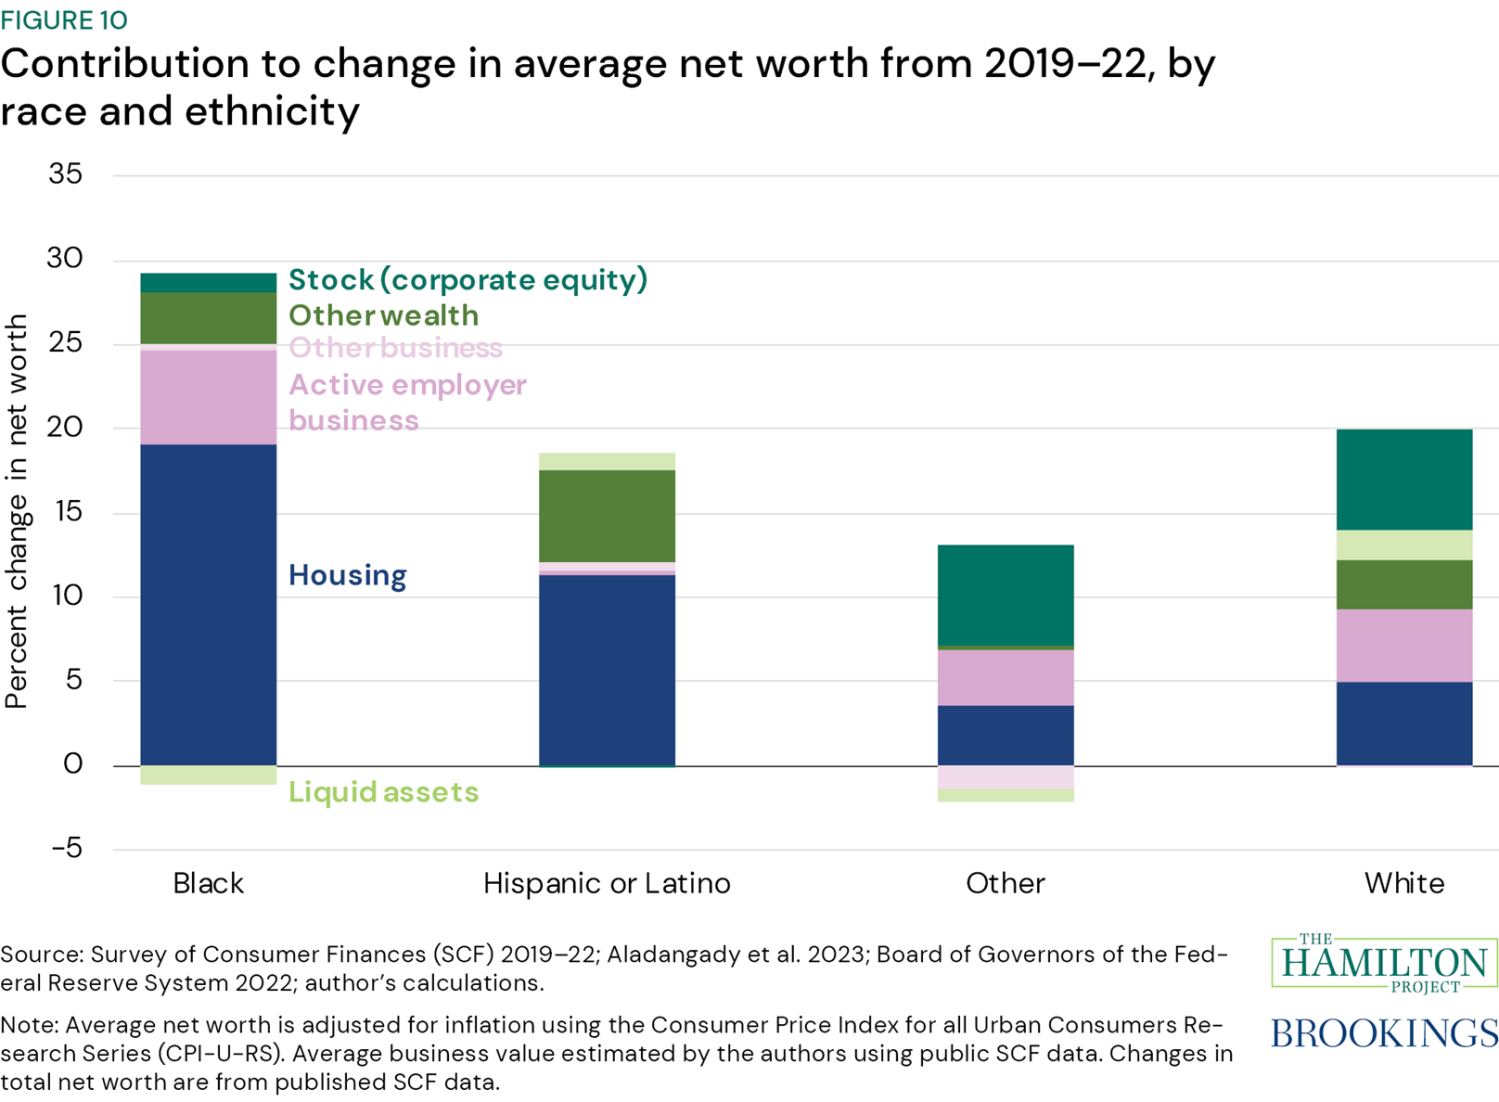 Figure 10: Contribution to change in average net worth from 2019-22, by race and ethnicity. Figure 10 investigates how increased levels of business ownership contributed to changes in overall net worth in this period.